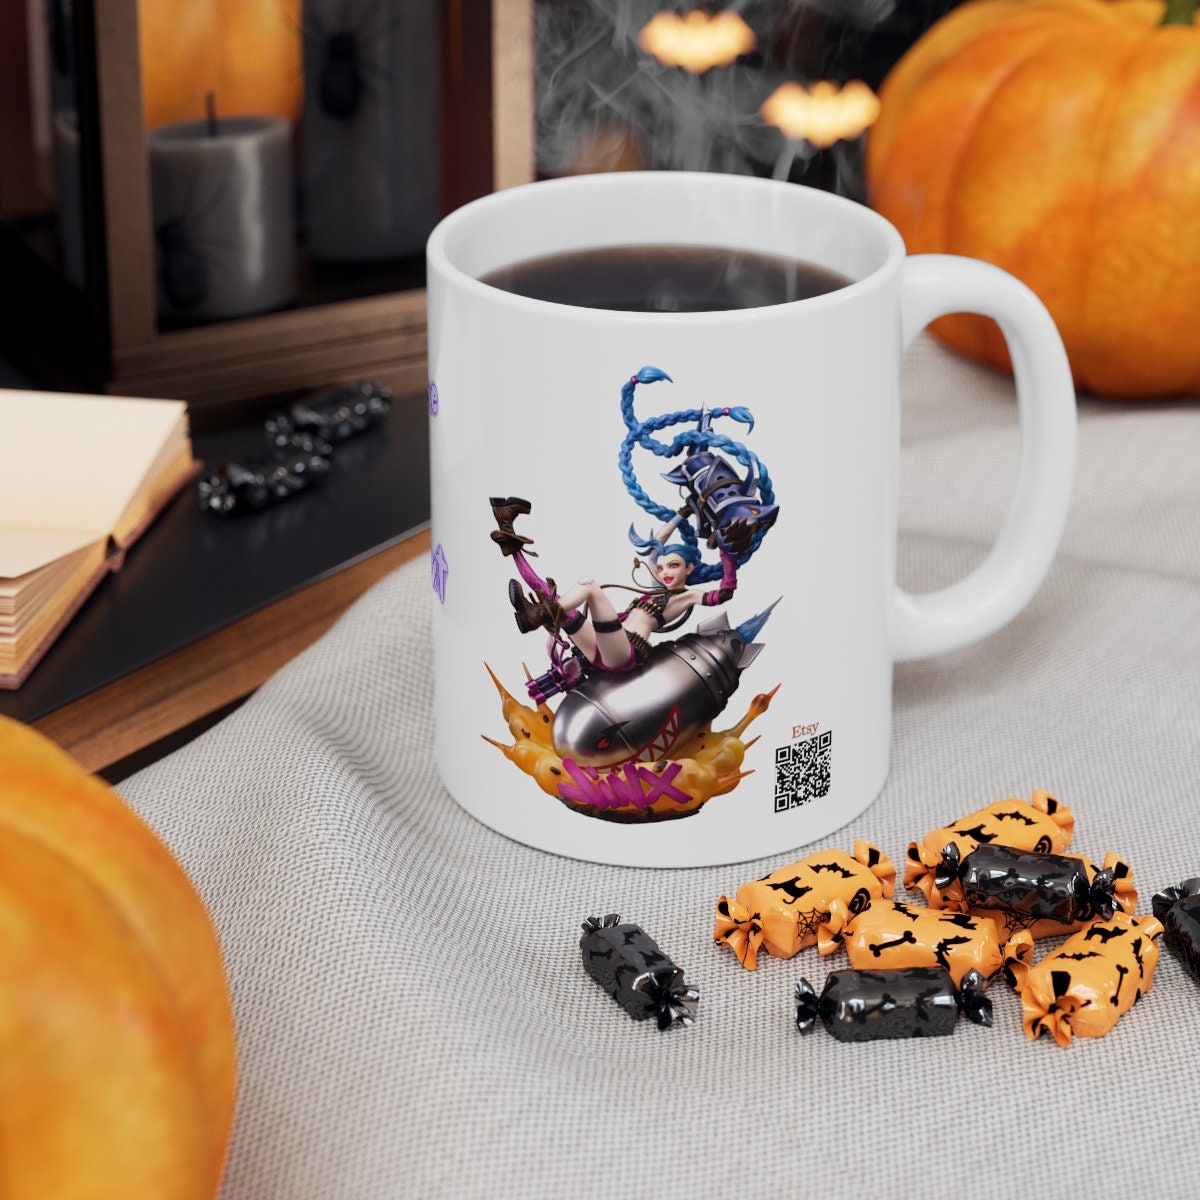 Jinx Kindred Teemo Miss Fortune Corki Jhin Ezreal League Of Legends MARKSMEN SERIES 3 Lol Personalizable Mug  Arcane Collections - League of Legends Fan Store